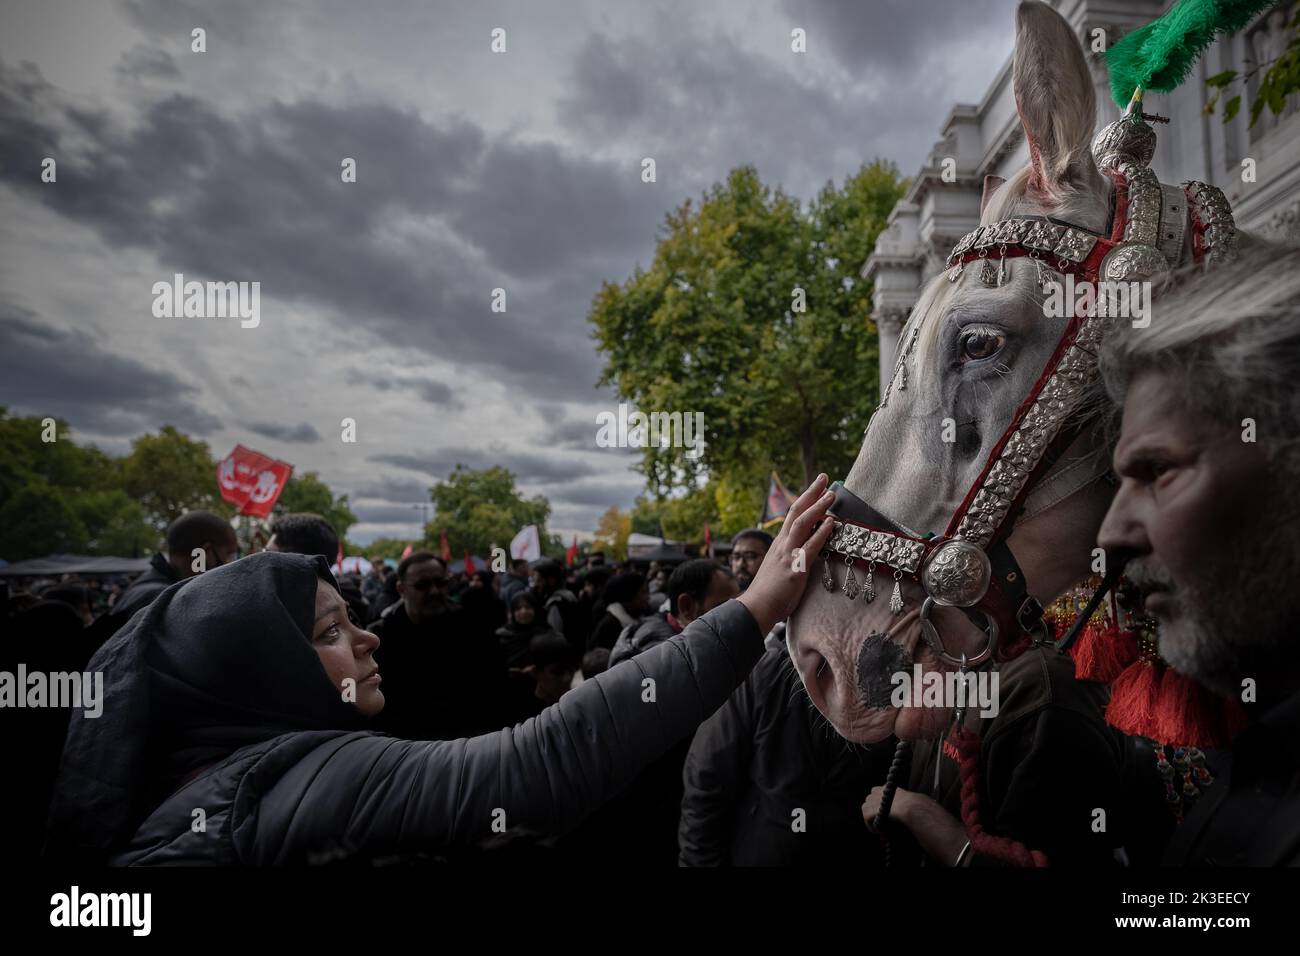 London, UK. 25th September 2022. Arbaeen Procession. Muslims greet ‘Zuljanah’, a grey Arabian Stallion representing the horse that belonged to Husayn ibn Ali (626-680). Hundreds of predominately Shia Muslims gather at Marble Arch for Arbaeen commemorations and procession marking the end of the 40-day mourning period for the seventh-century killing of Iman Hussein, the grandson of Prophet Muhammad. Credit: Guy Corbishley/Alamy Live News Stock Photo